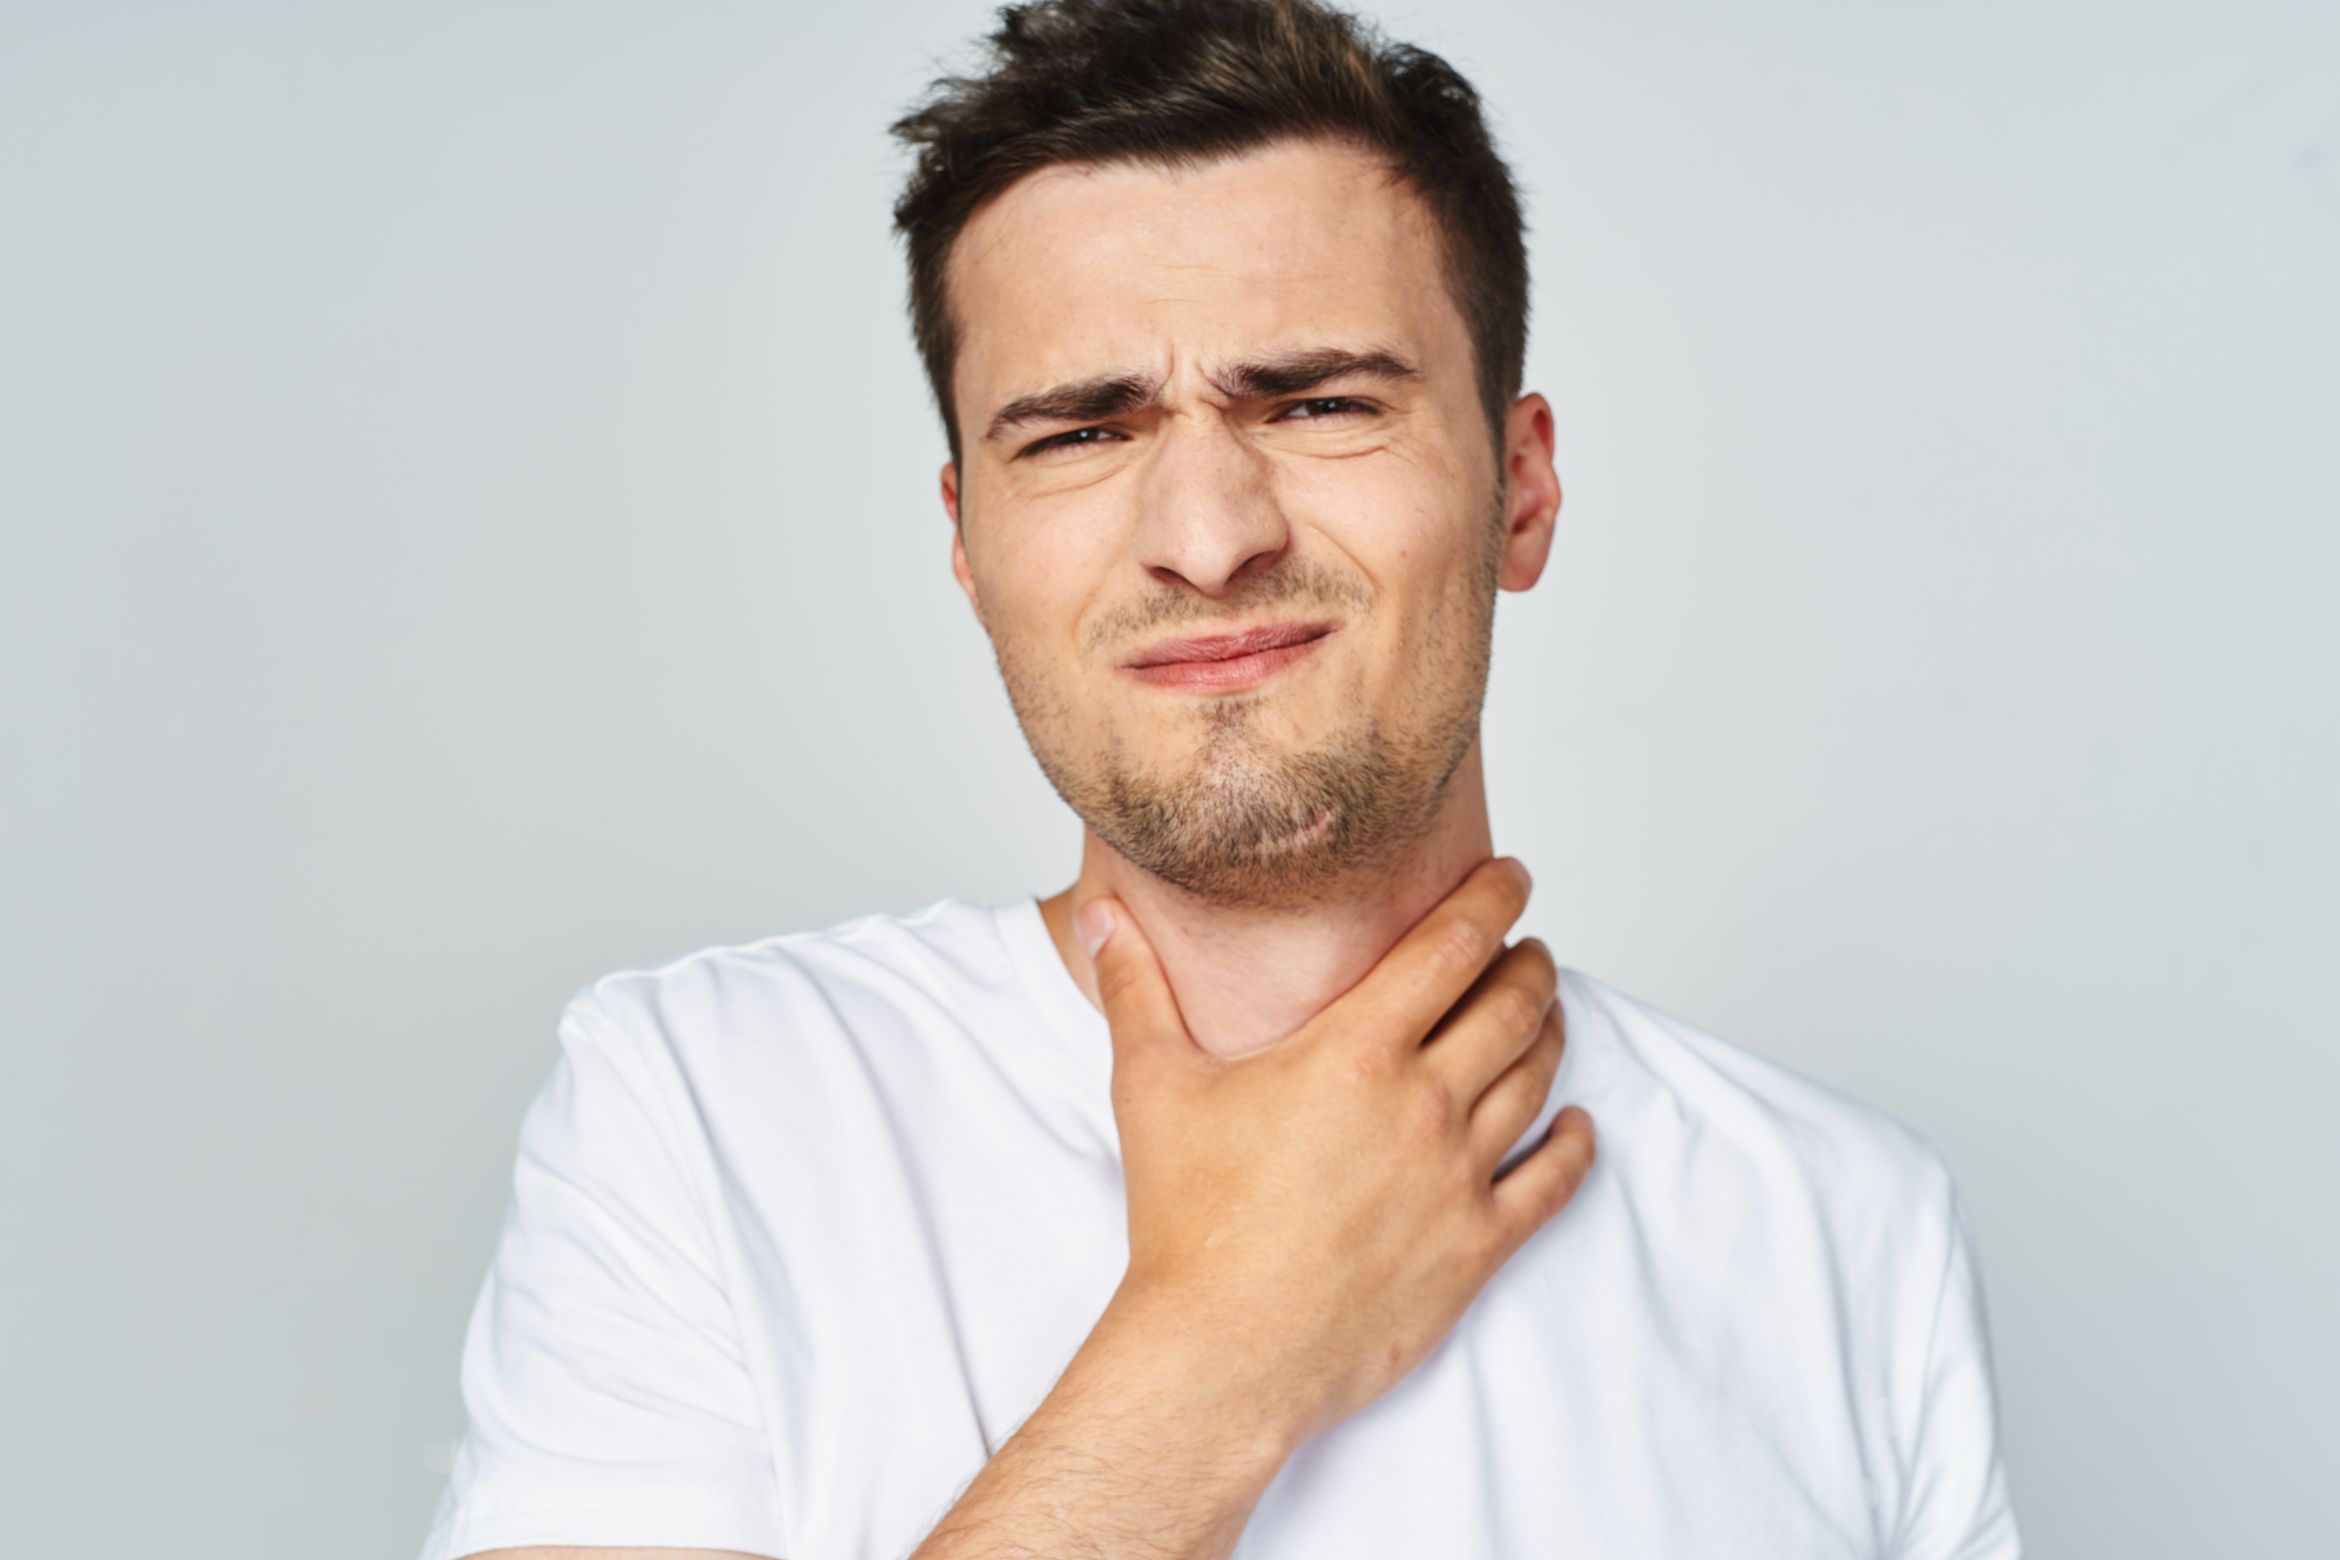 What are the Symptoms of Dry Cough and the Treatment for Dry Cough?